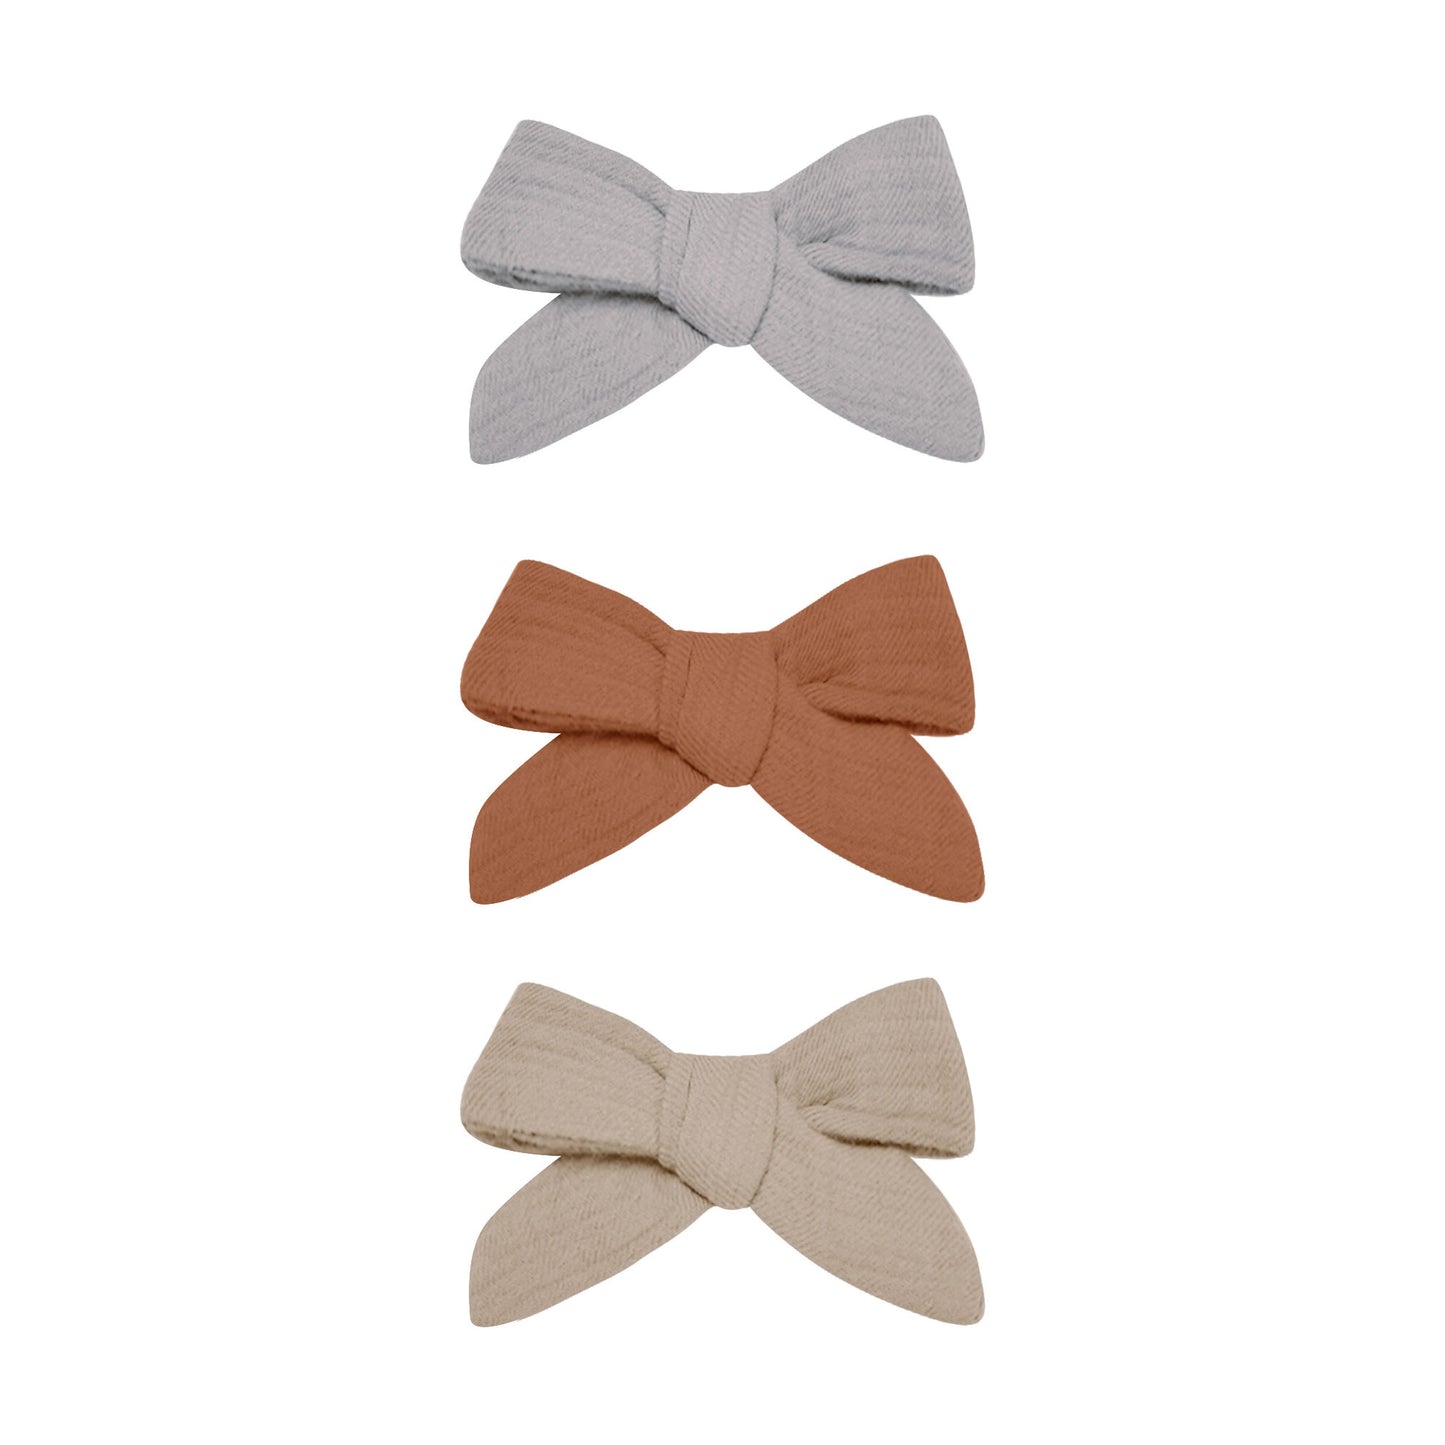 Quincy Mae Bow Clip Set of 3 - Periwinkle / Clay / Oat